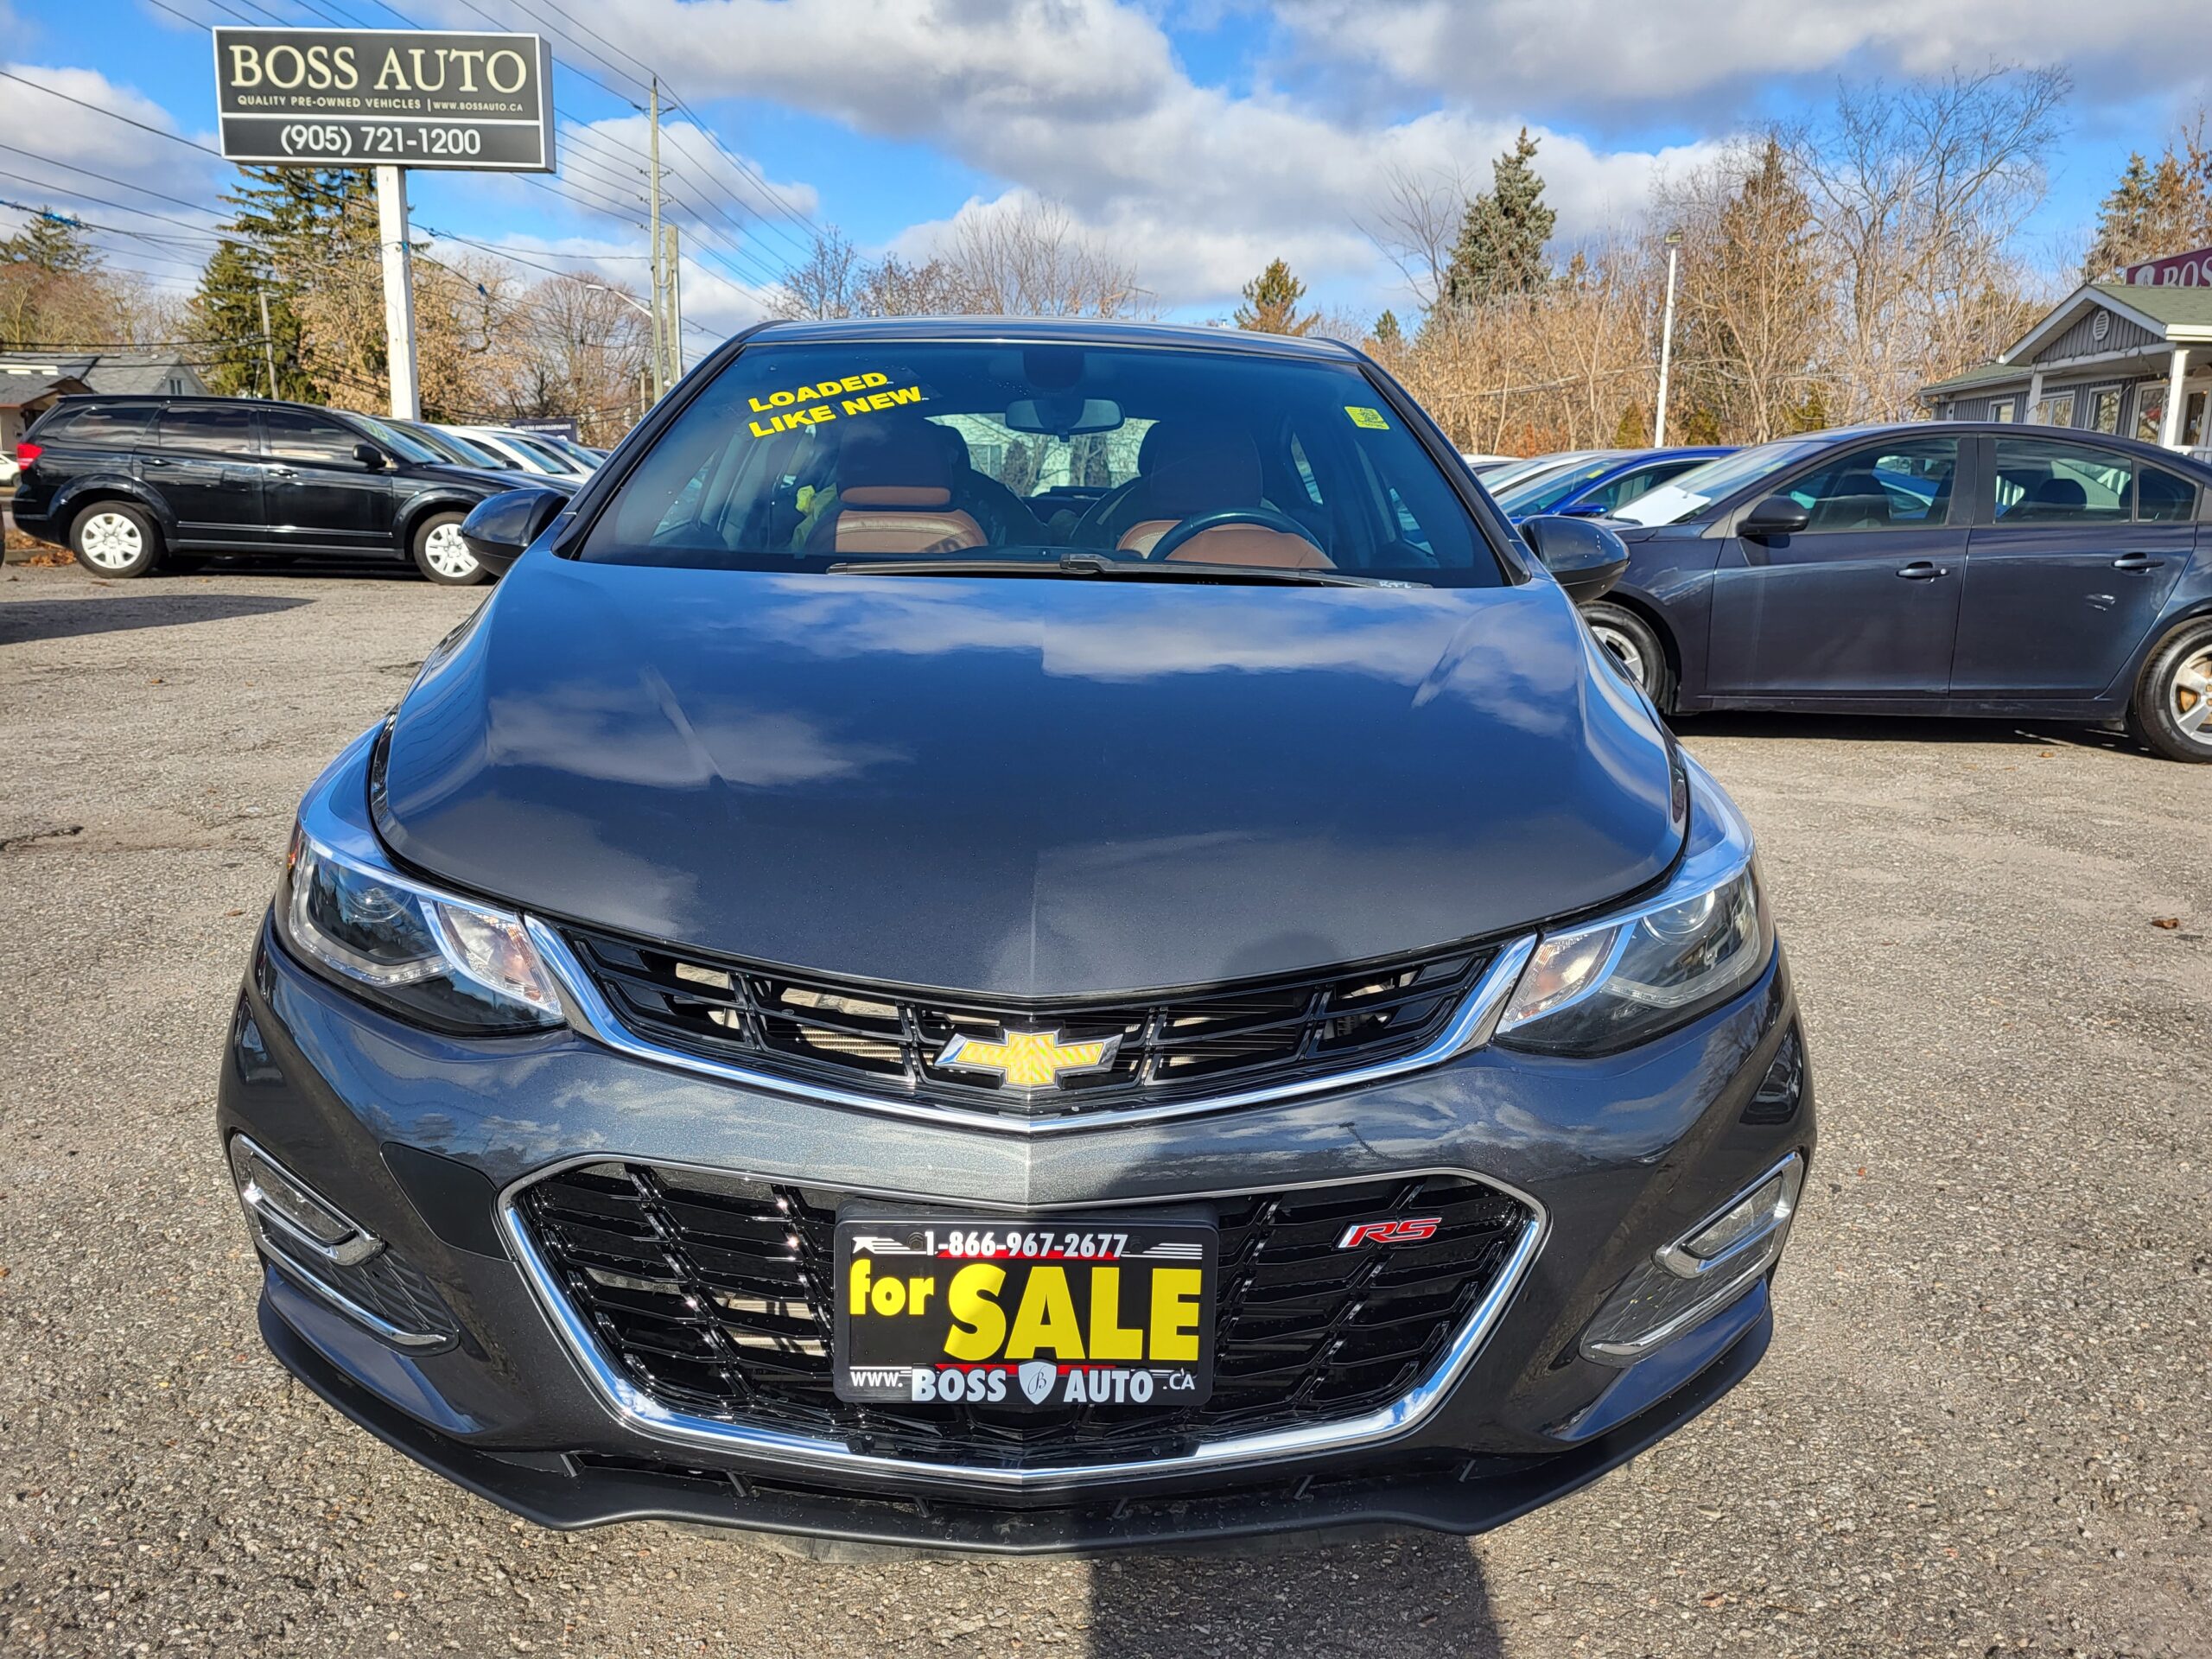 2017 Chevrolet Cruze Premier Hatchback - Boss Auto Sales : Used Cars  Oshawa, Whitby, Bowmanville, Ajax, Pickering